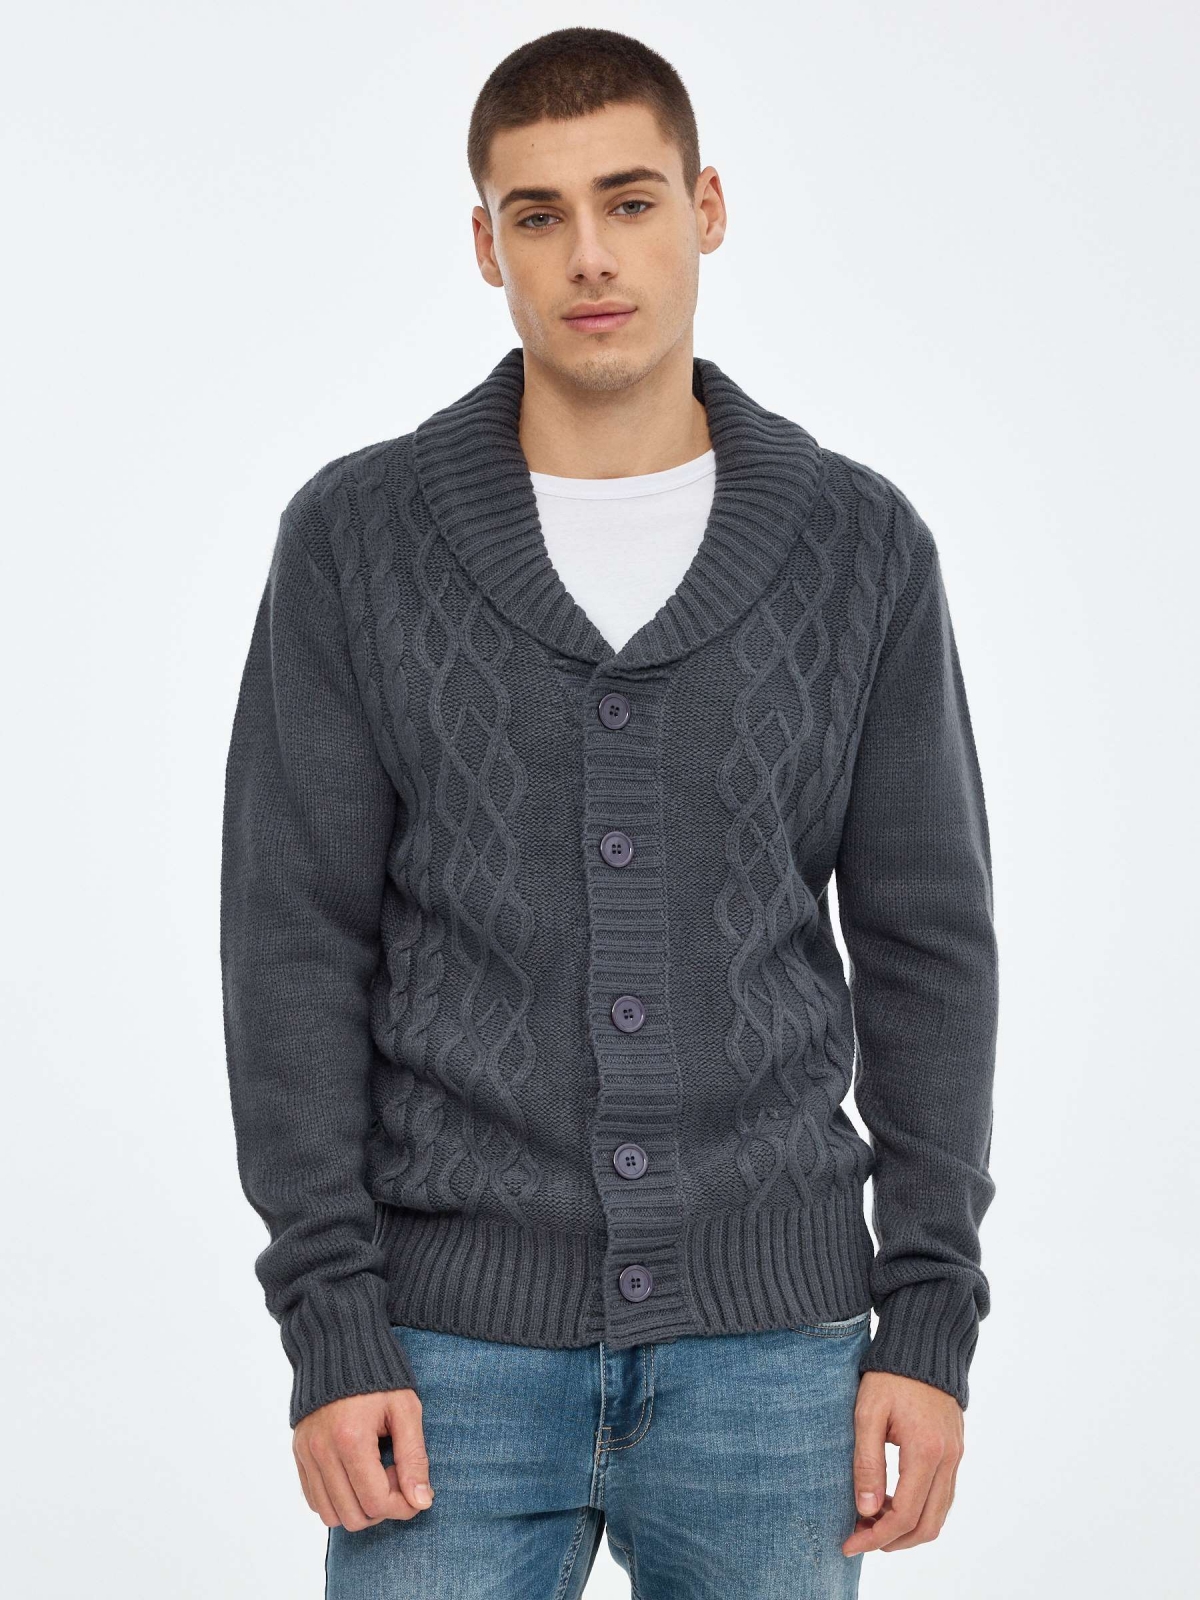 Knitted jacket stone grey middle front view